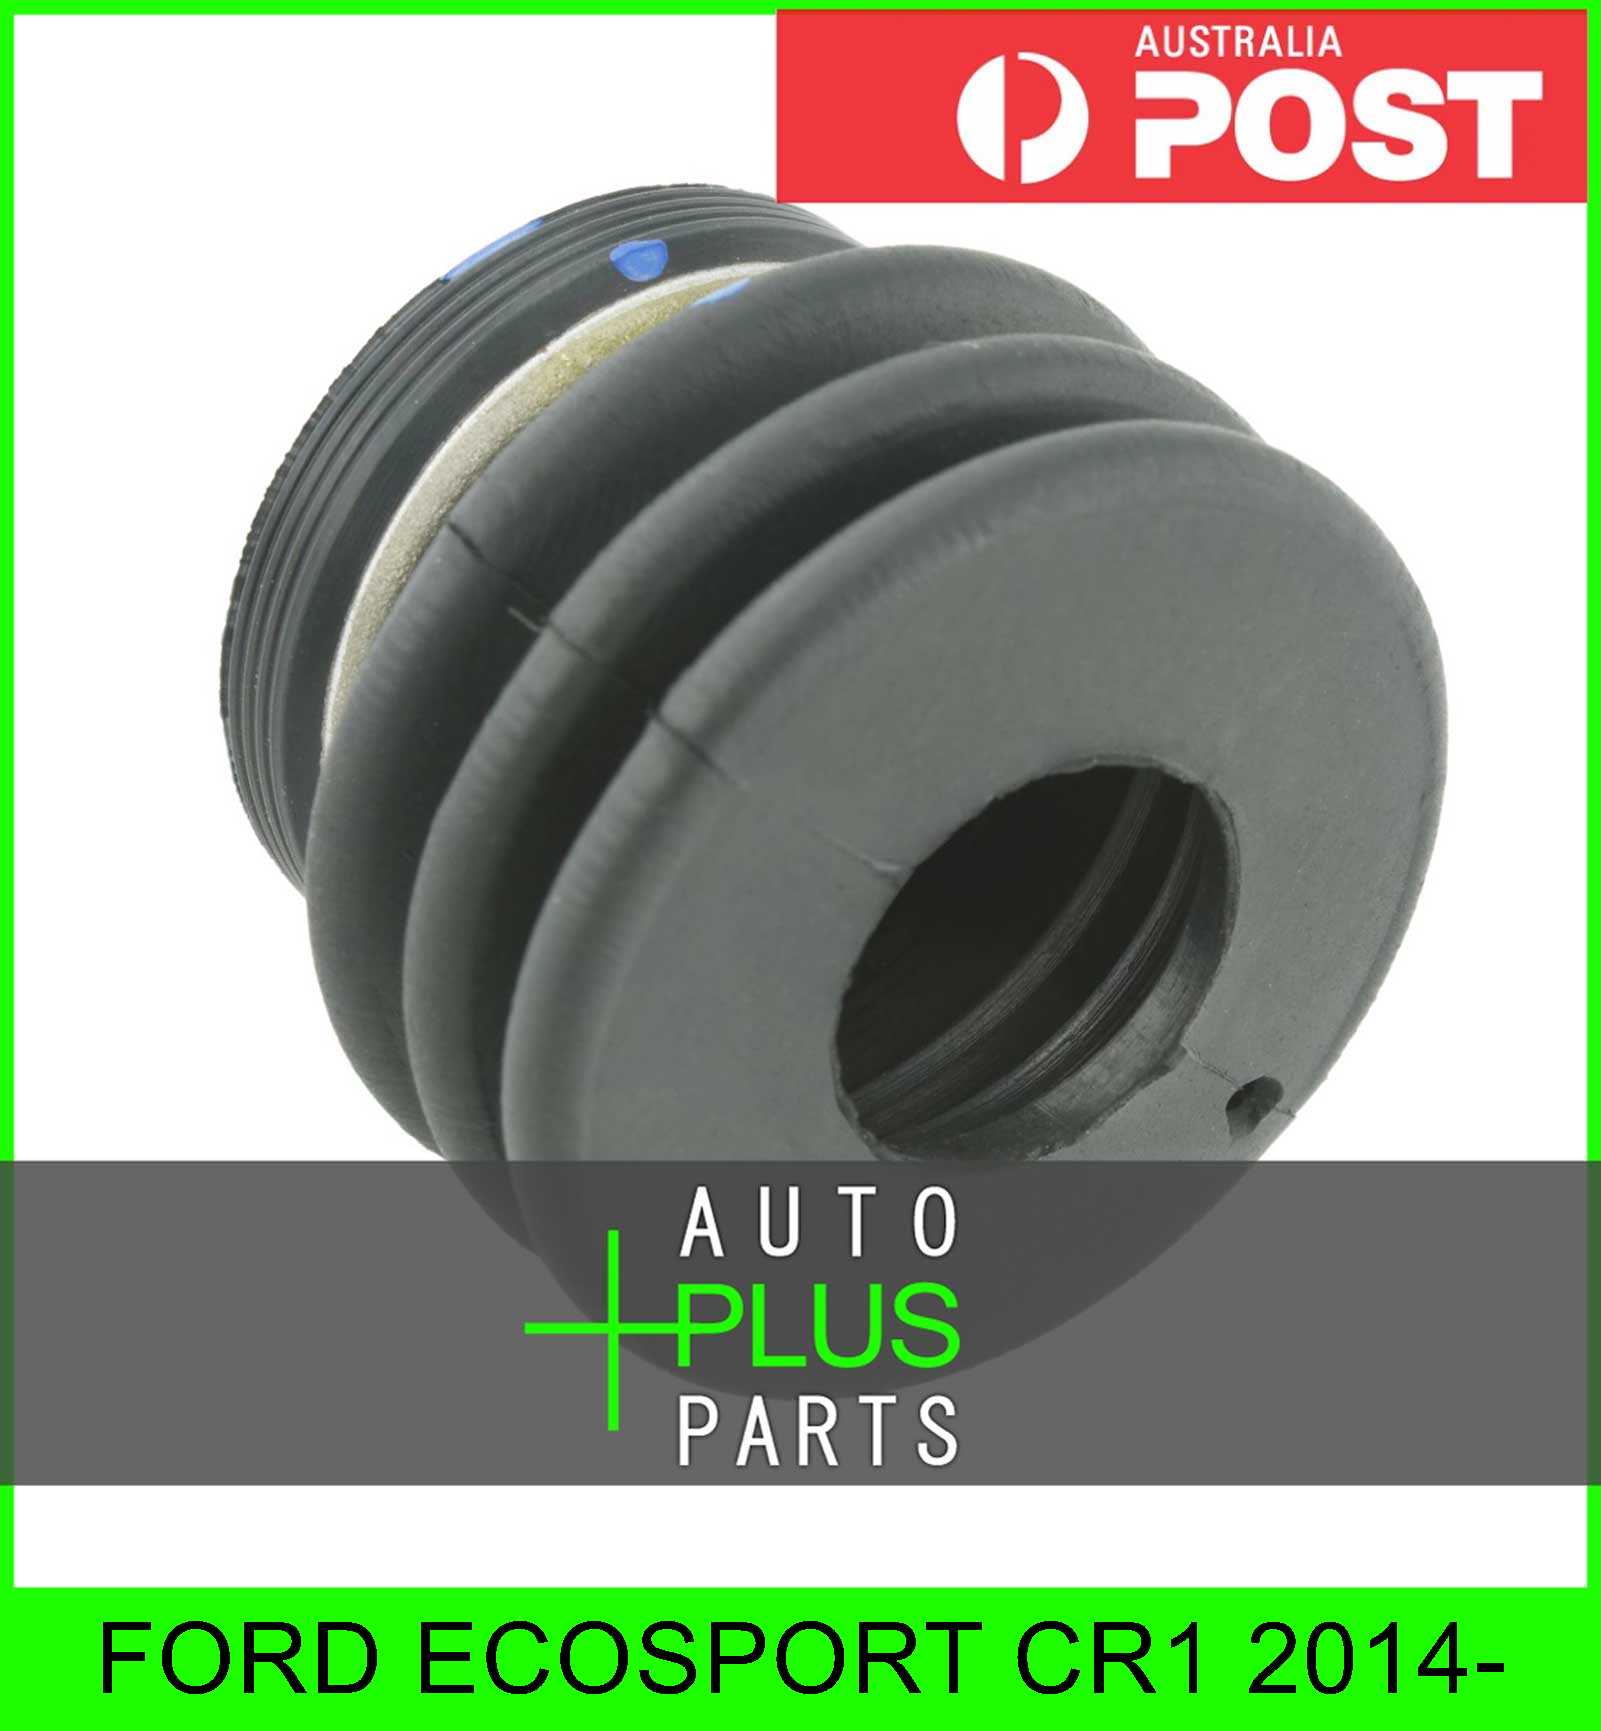 Fits FORD ECOSPORT CR1 2014- - GEAR SHIFT LEVER SEAL 14.9X25.25X6.1X9 ...